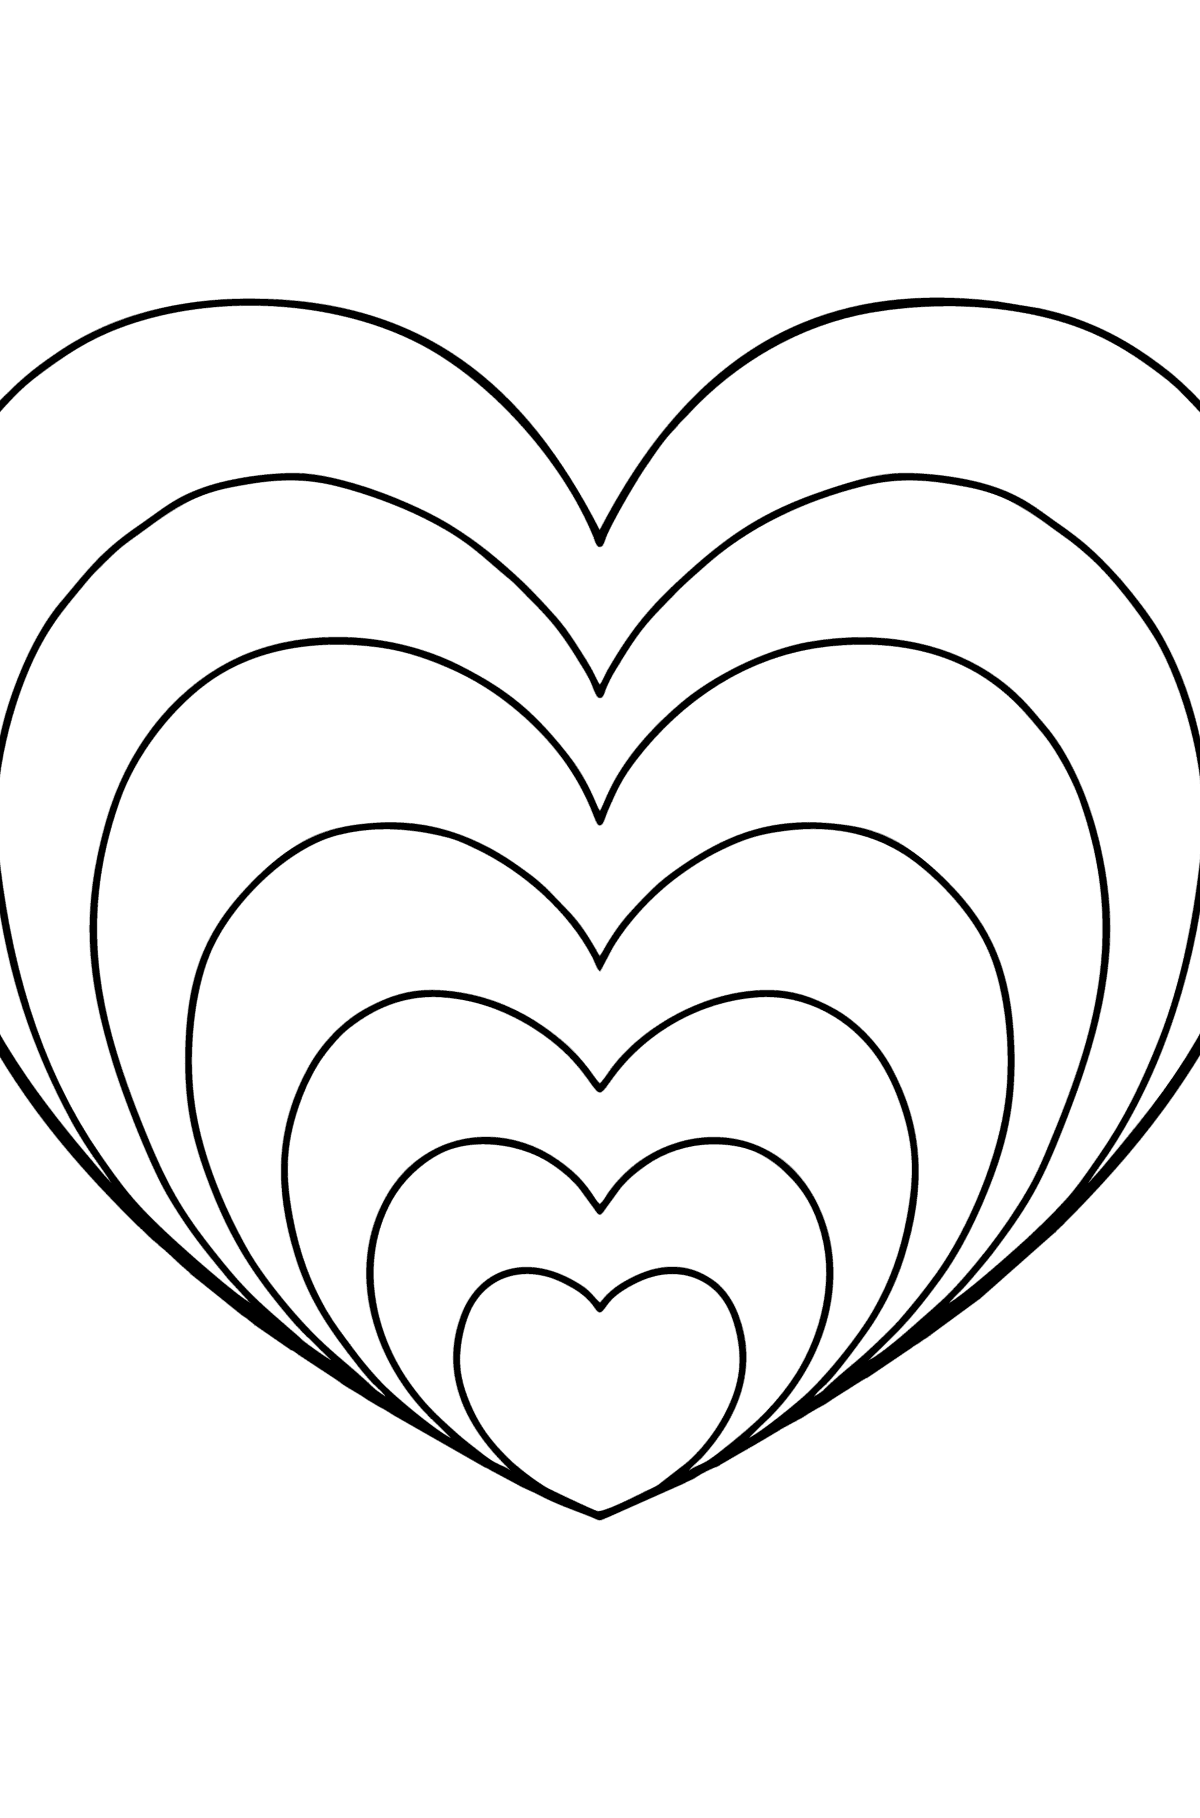 Simple Zen heart coloring page - Coloring Pages for Kids